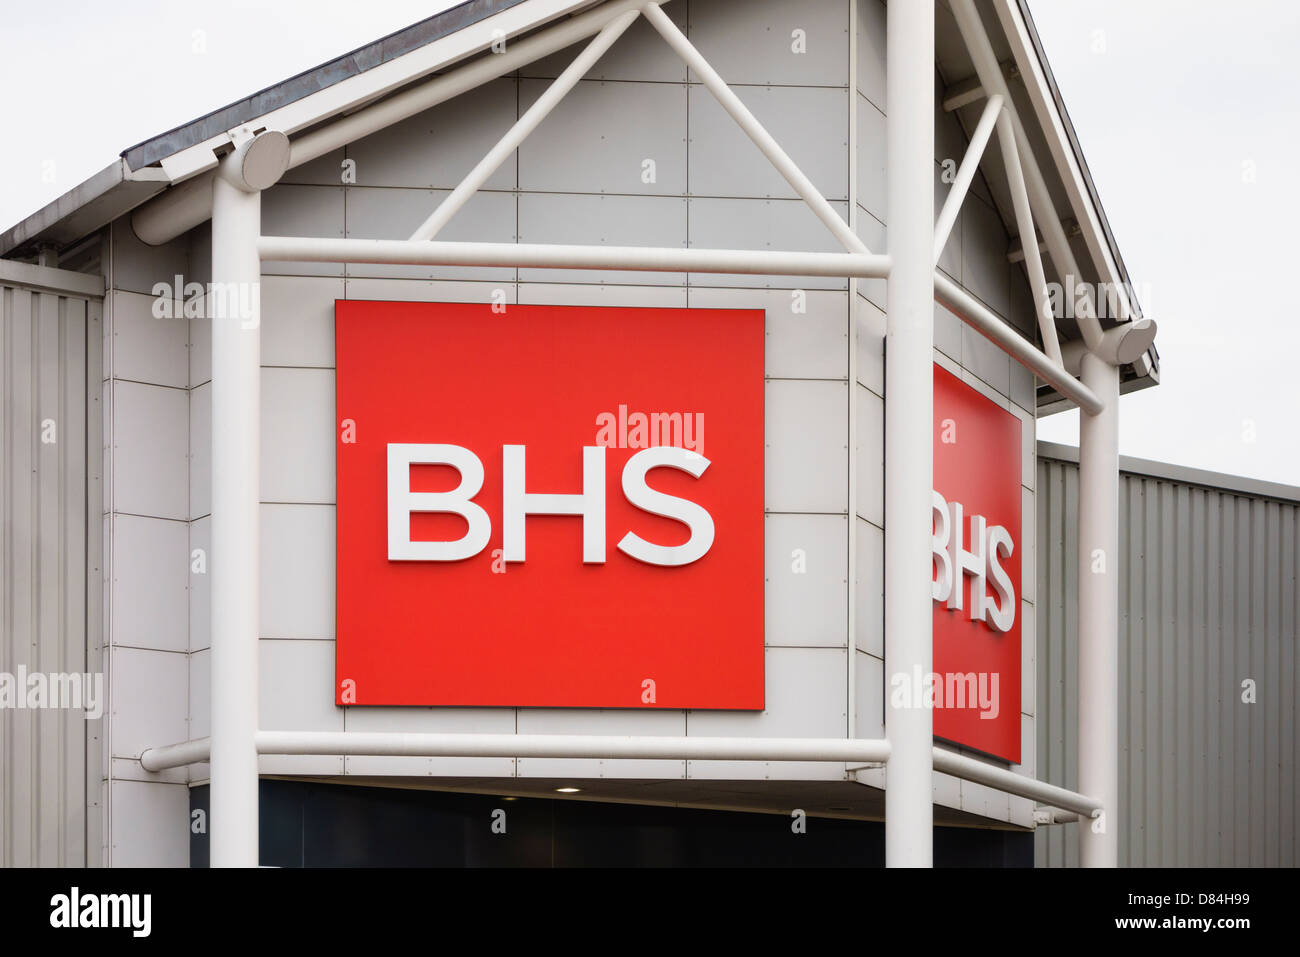 British Home Stores BHS logo above the department store shop. Telford, Shropshire, England, UK, Britain Stock Photo